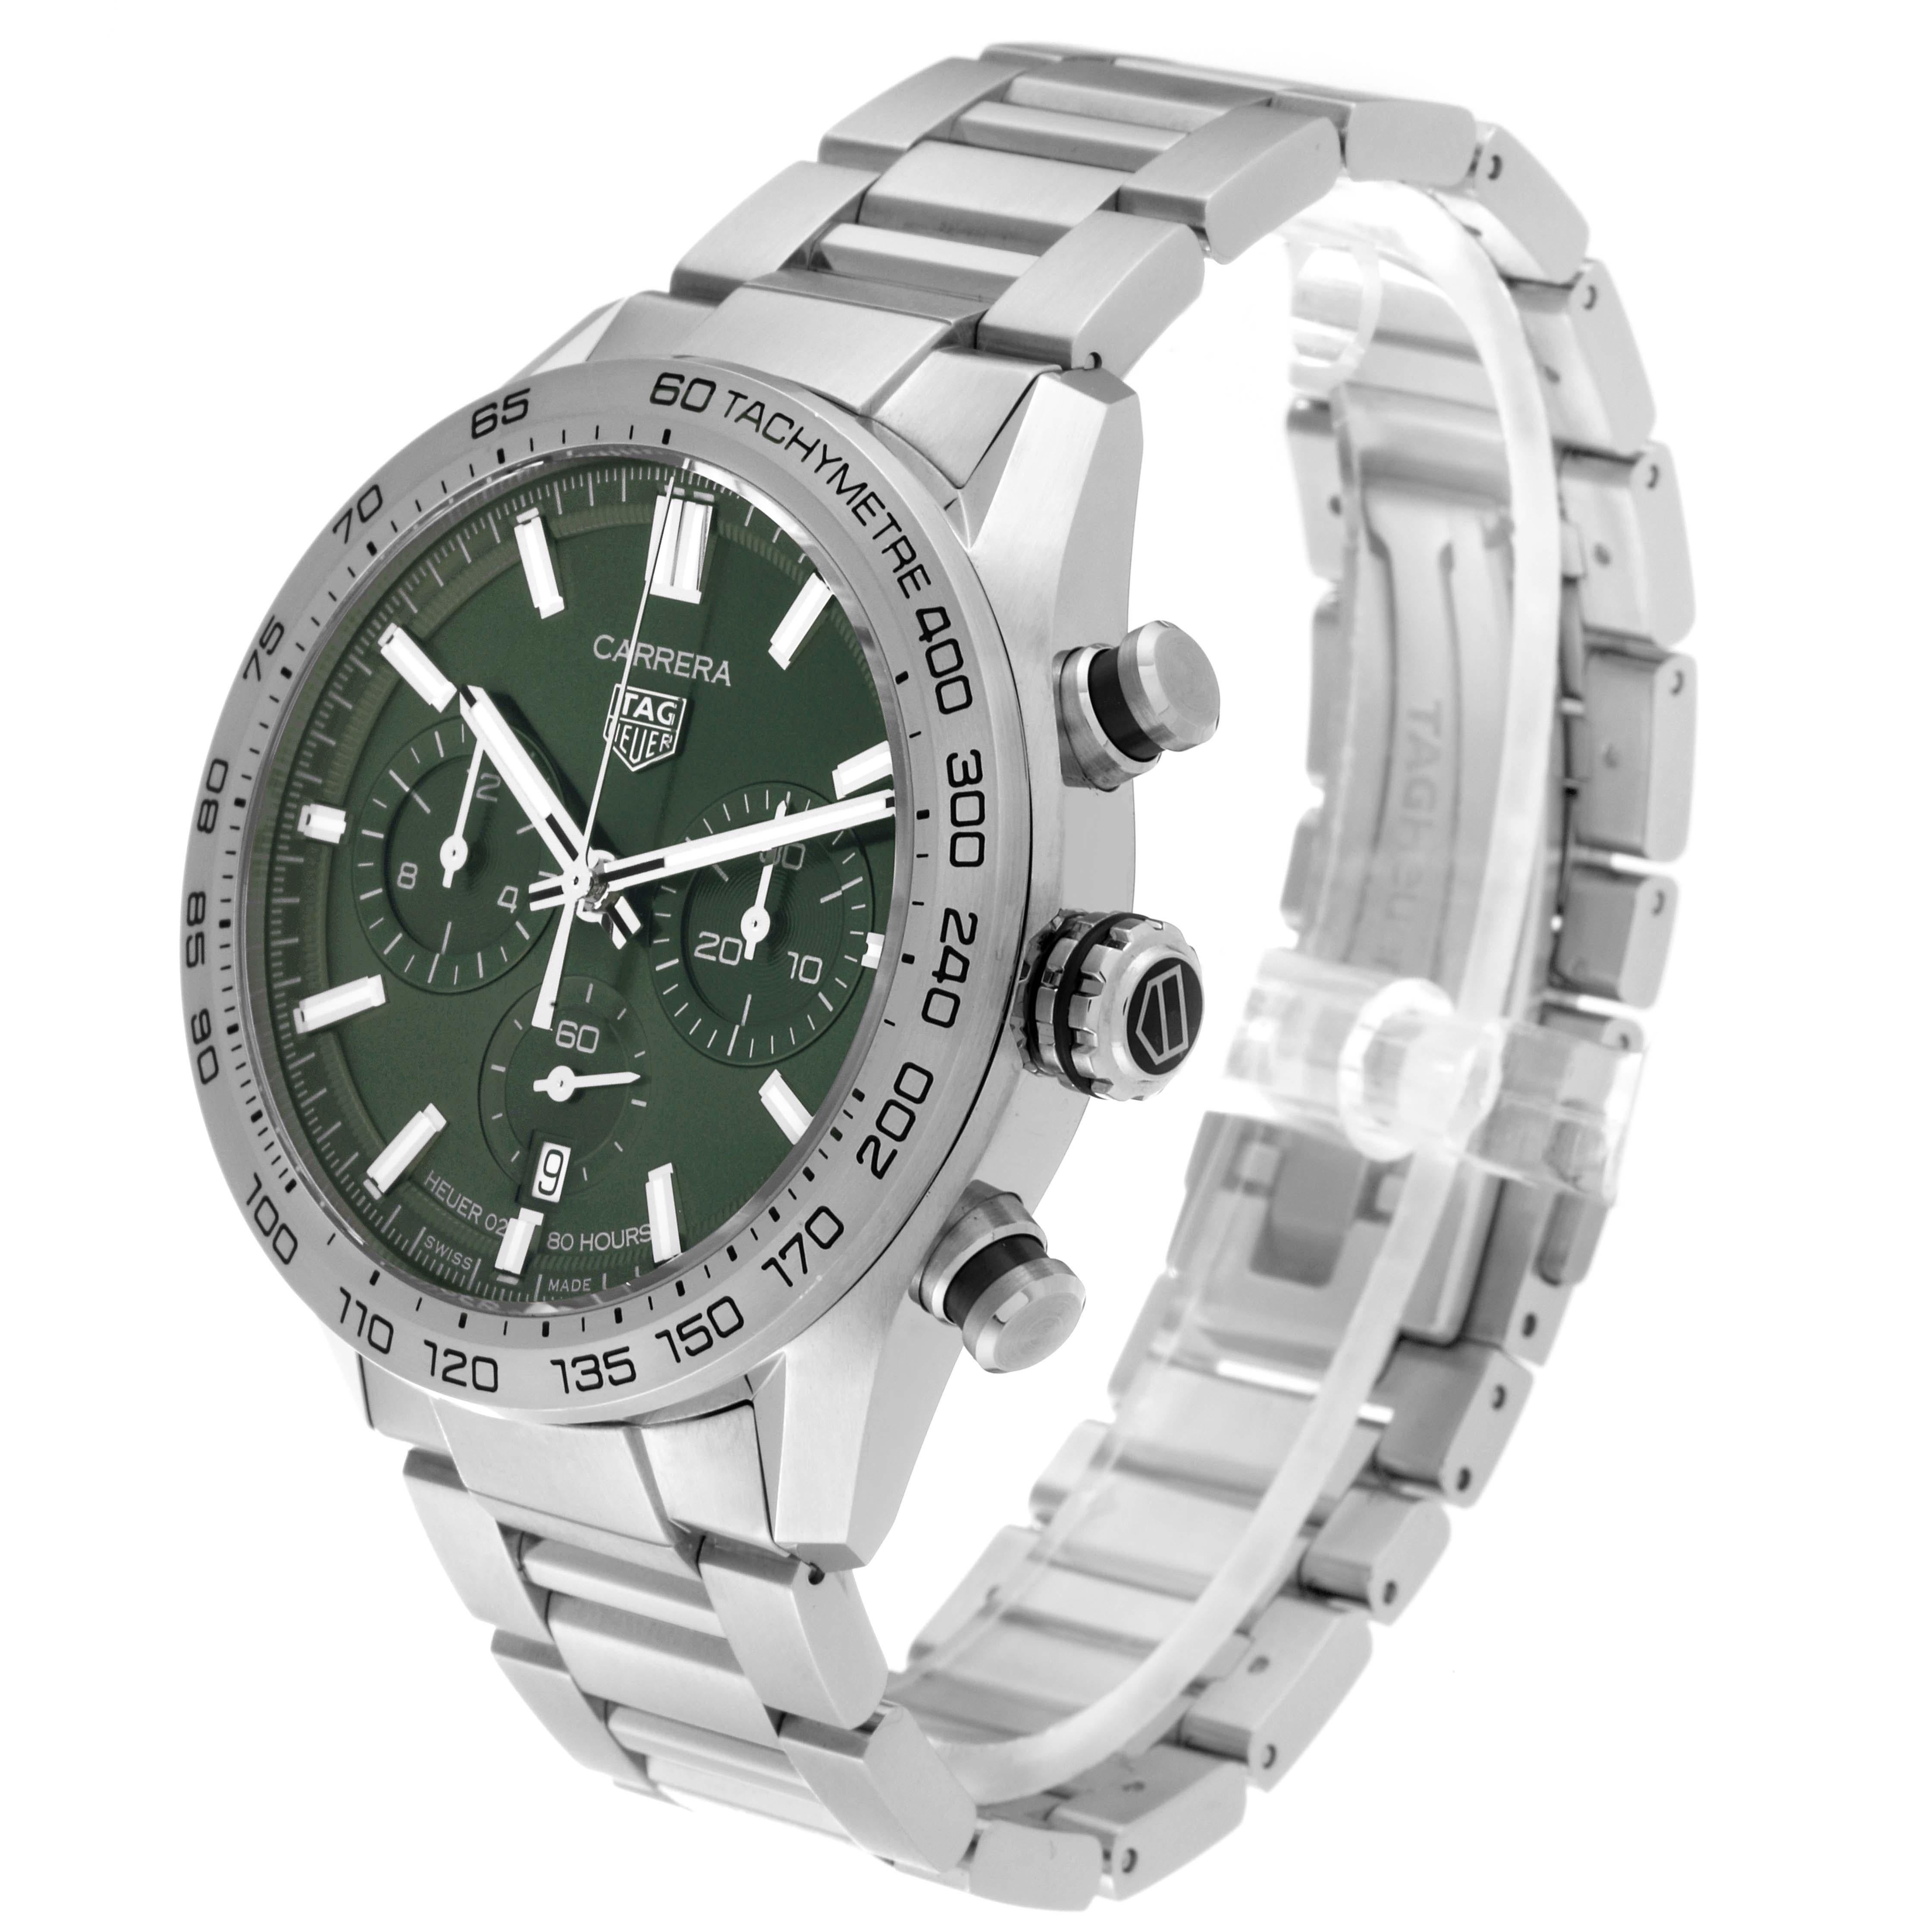 Tag Heuer Carrera Chronograph Green Dial Steel Mens Watch CBN2A10 Box Card For Sale 5